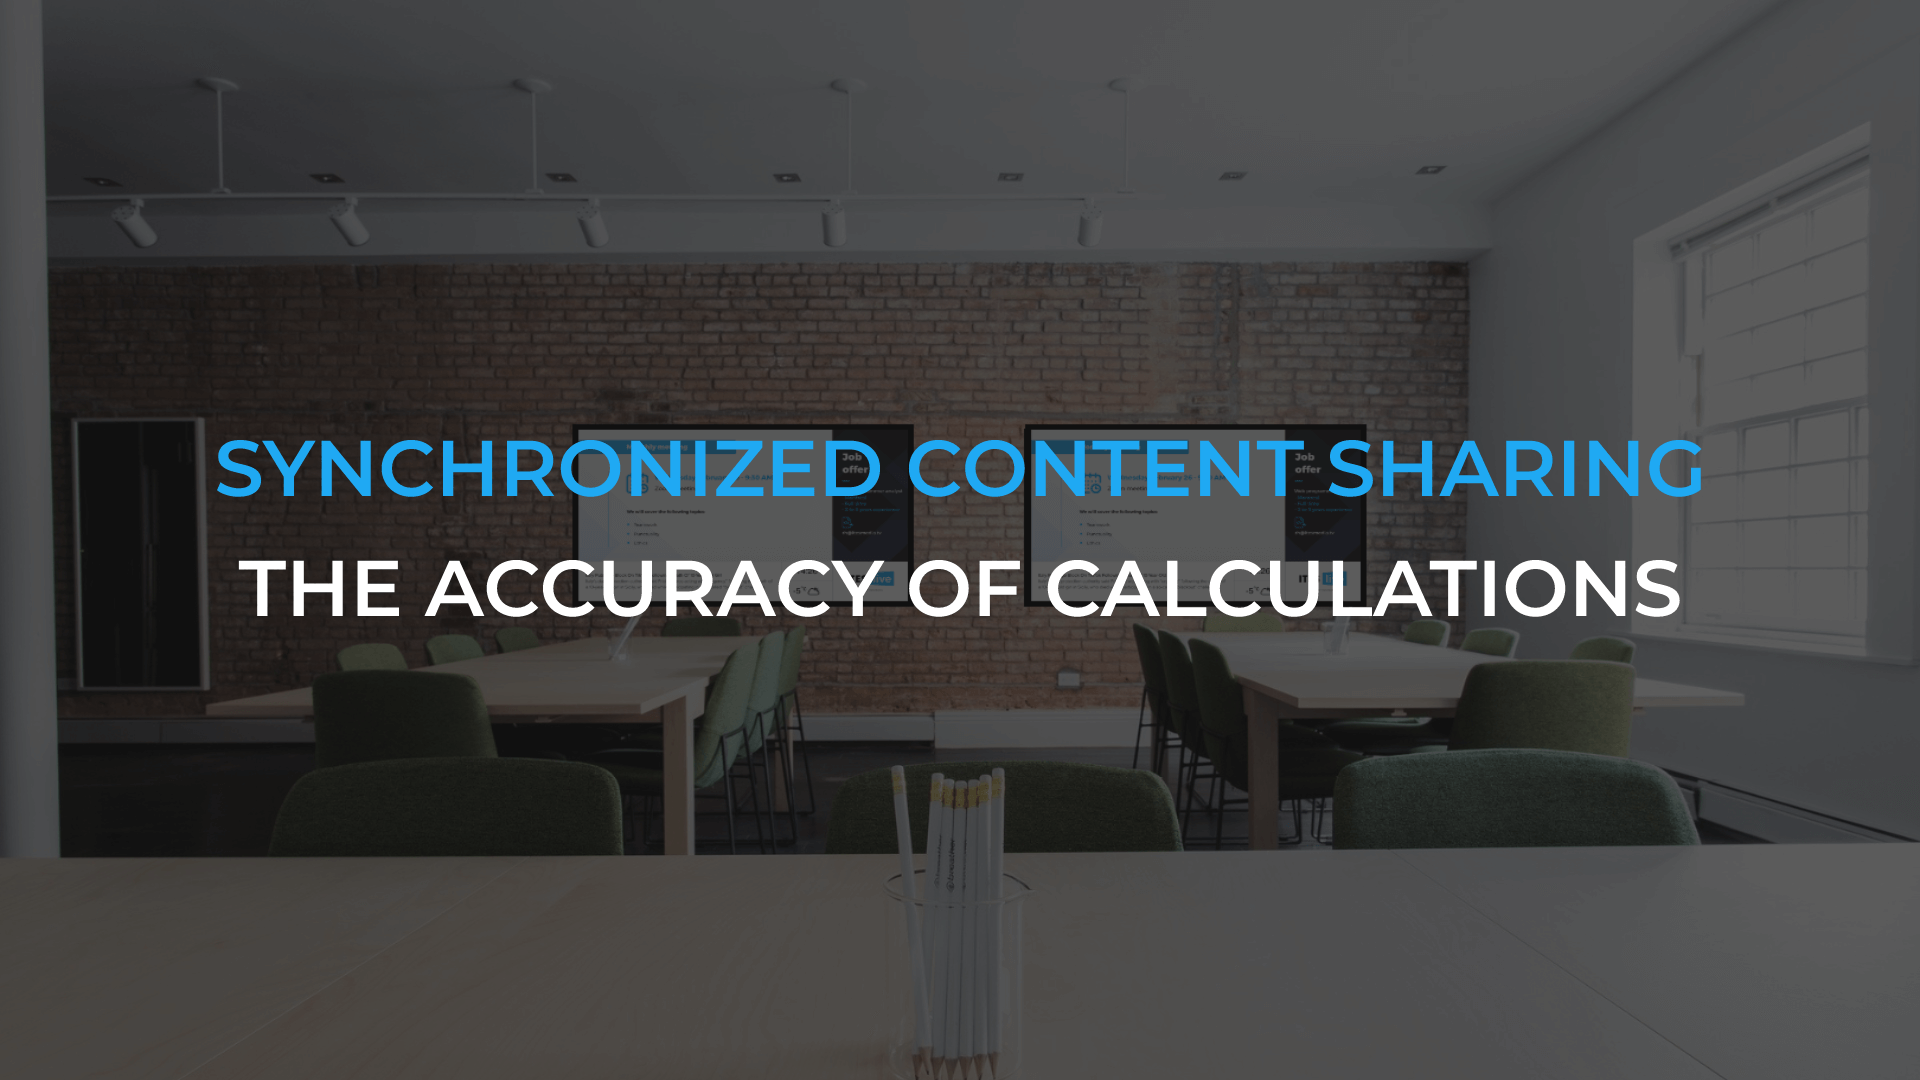 Synchronized content sharing: The accuracy of calculations